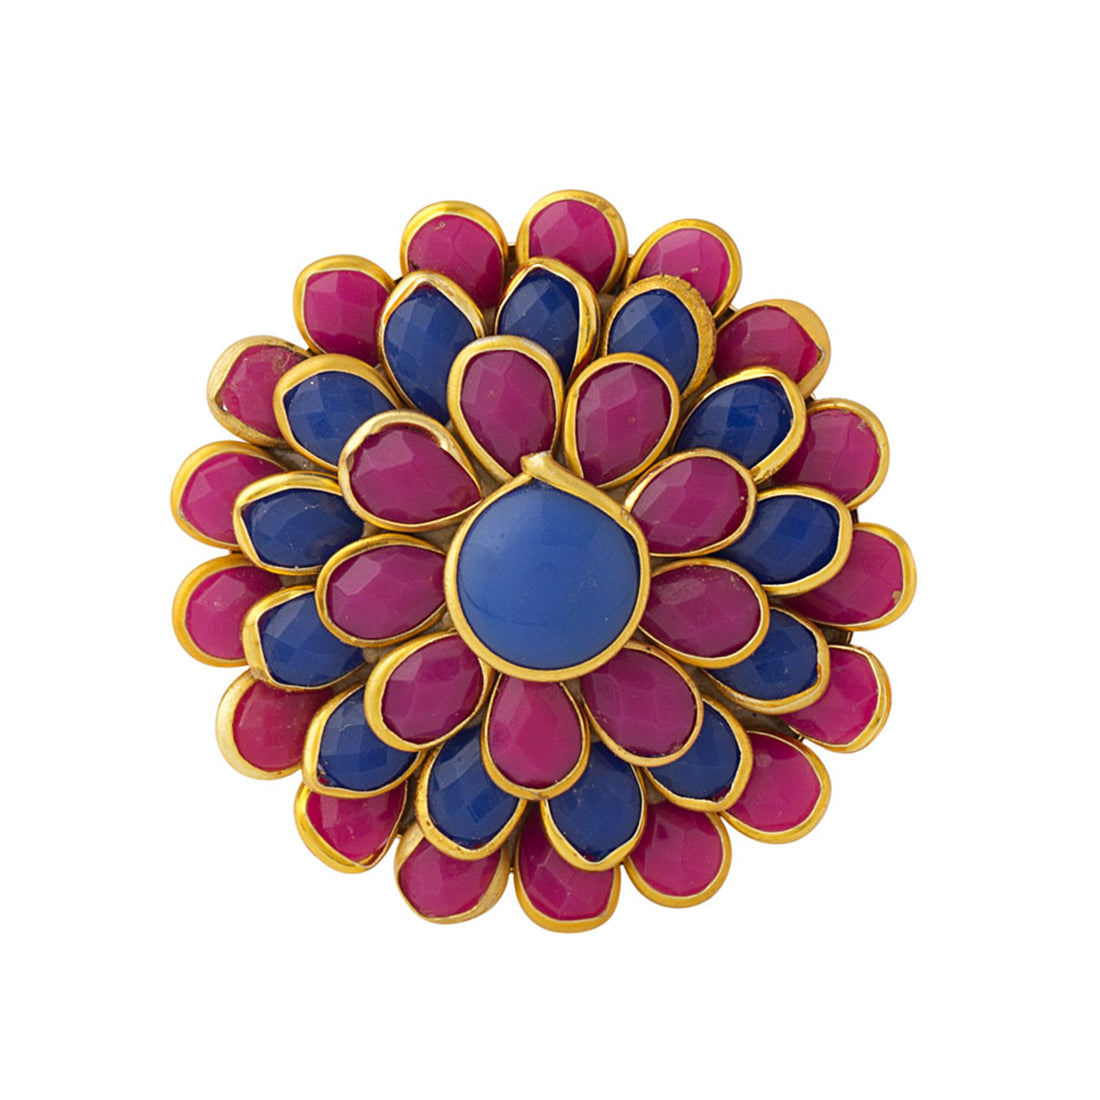 Colorful Ring In Pacchi Design For Women